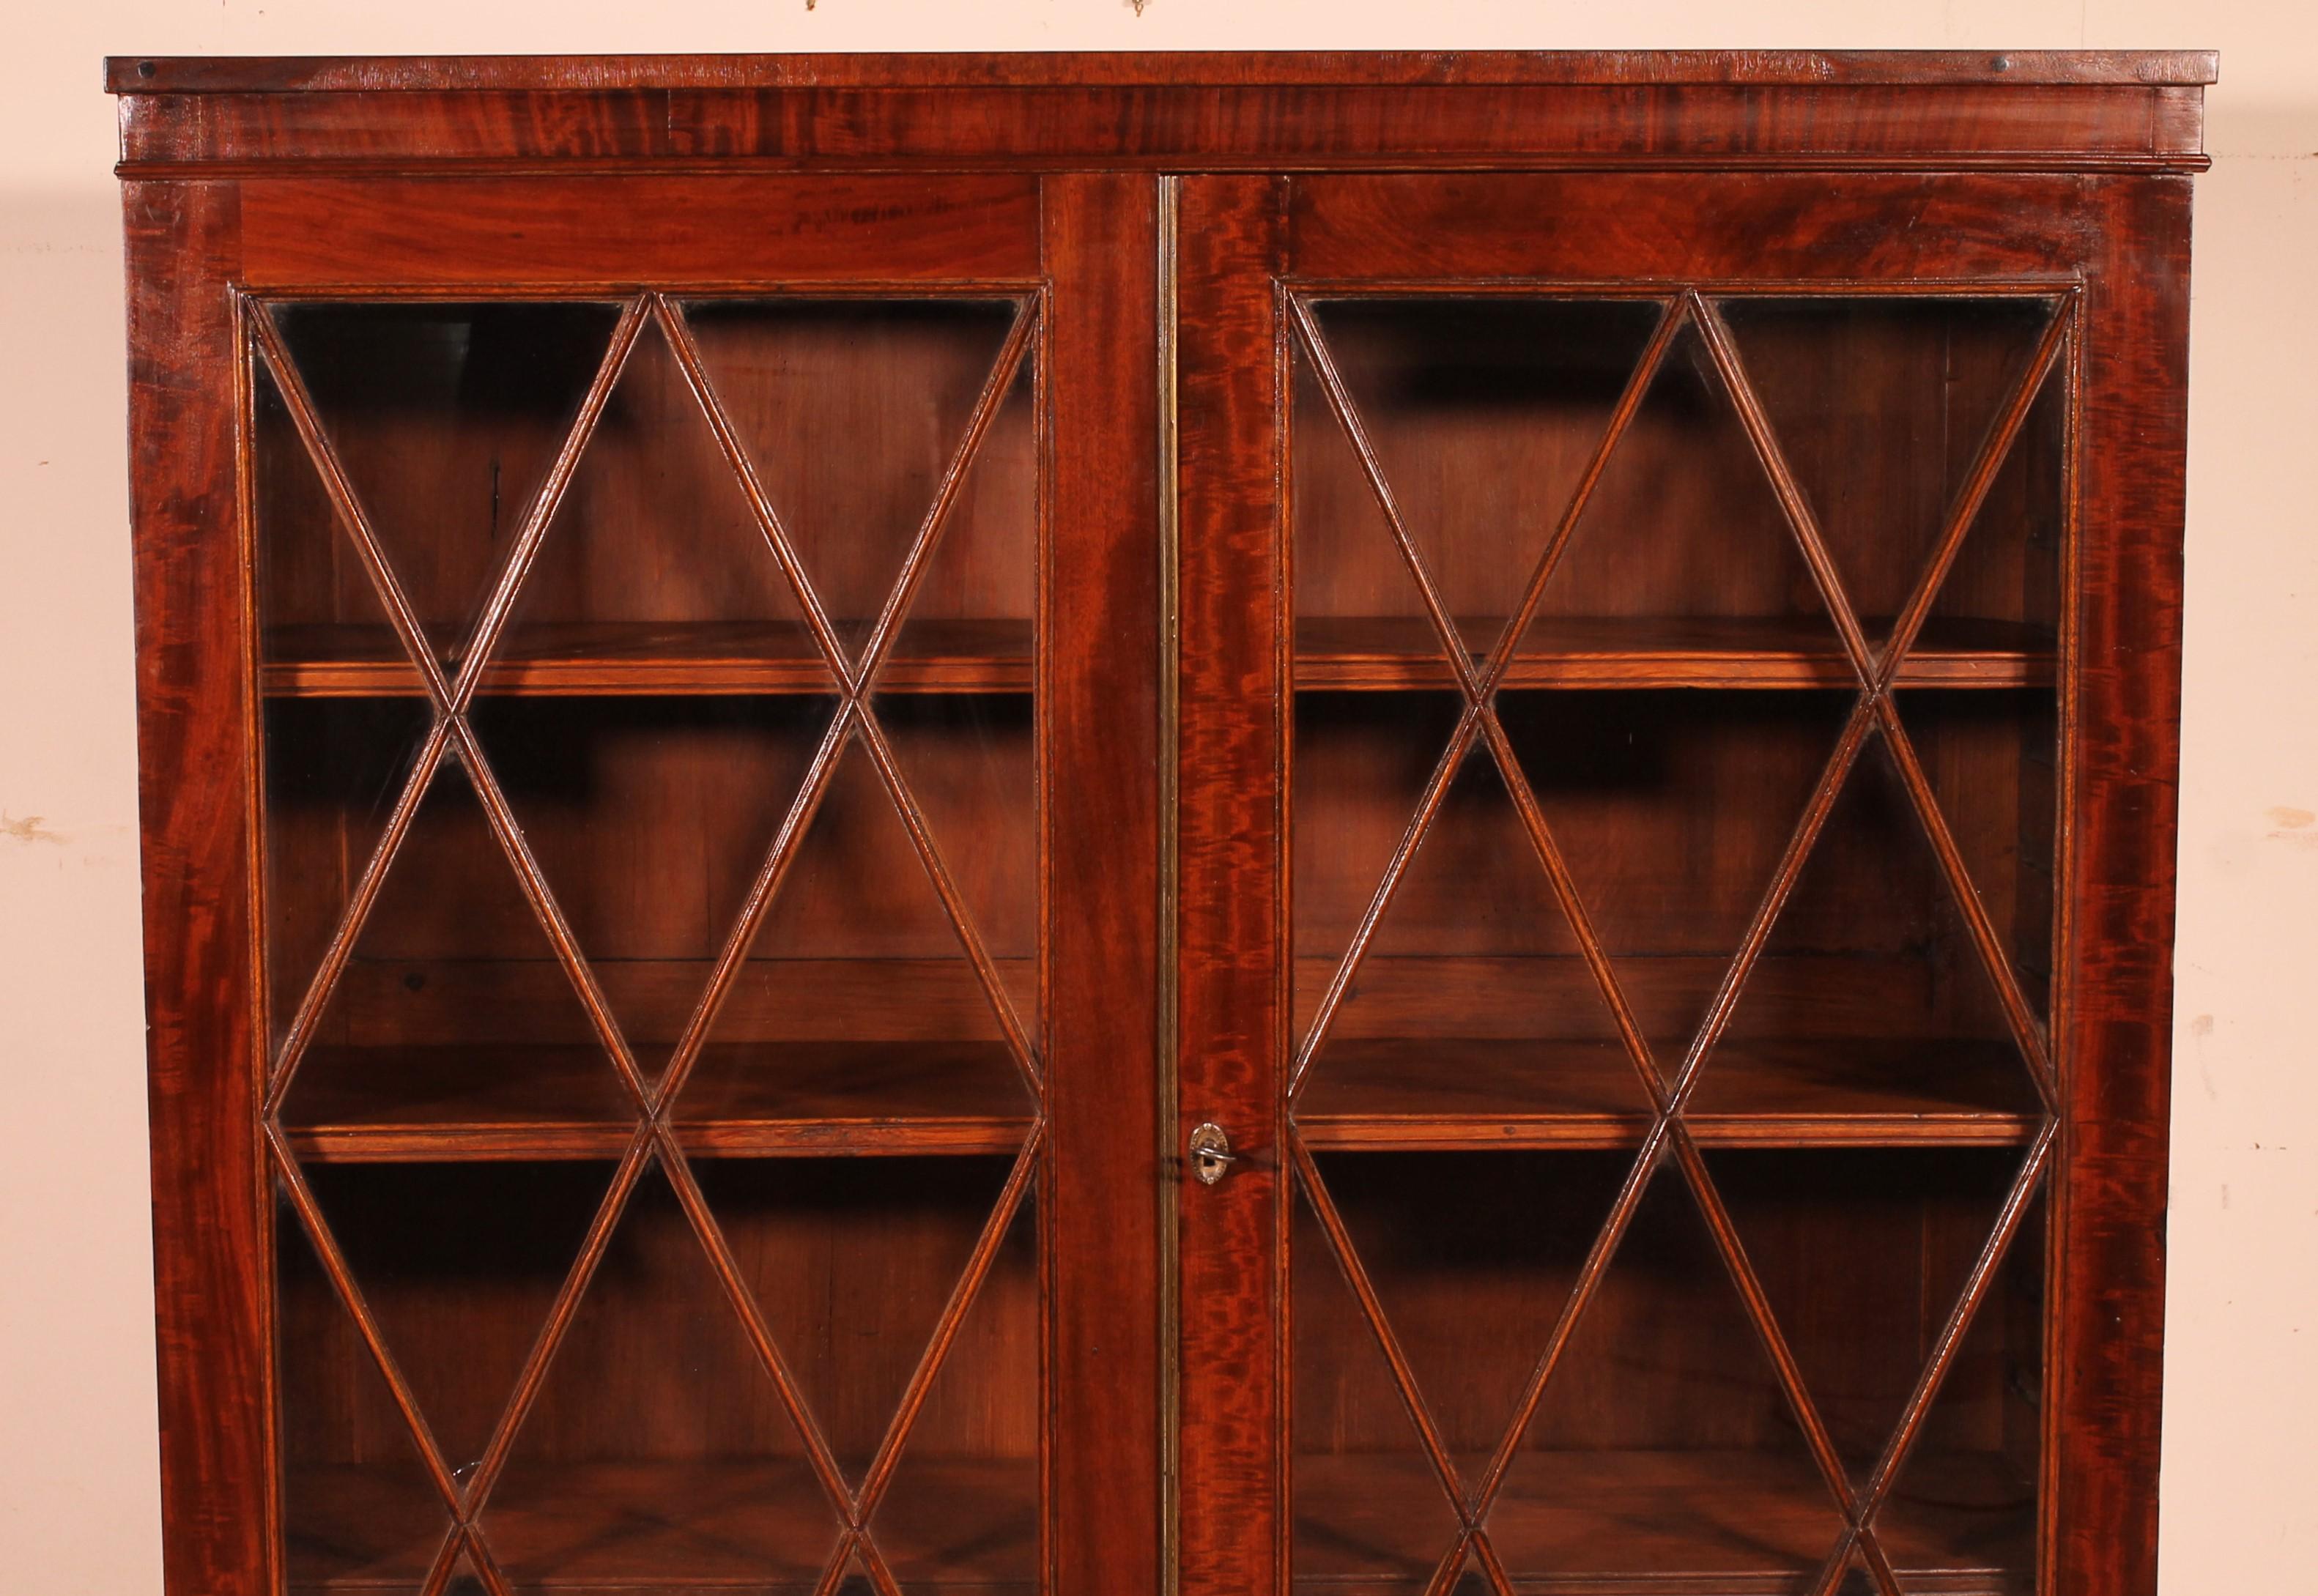 British Mahogany Glazed Bookcase From The 19th Century - England For Sale